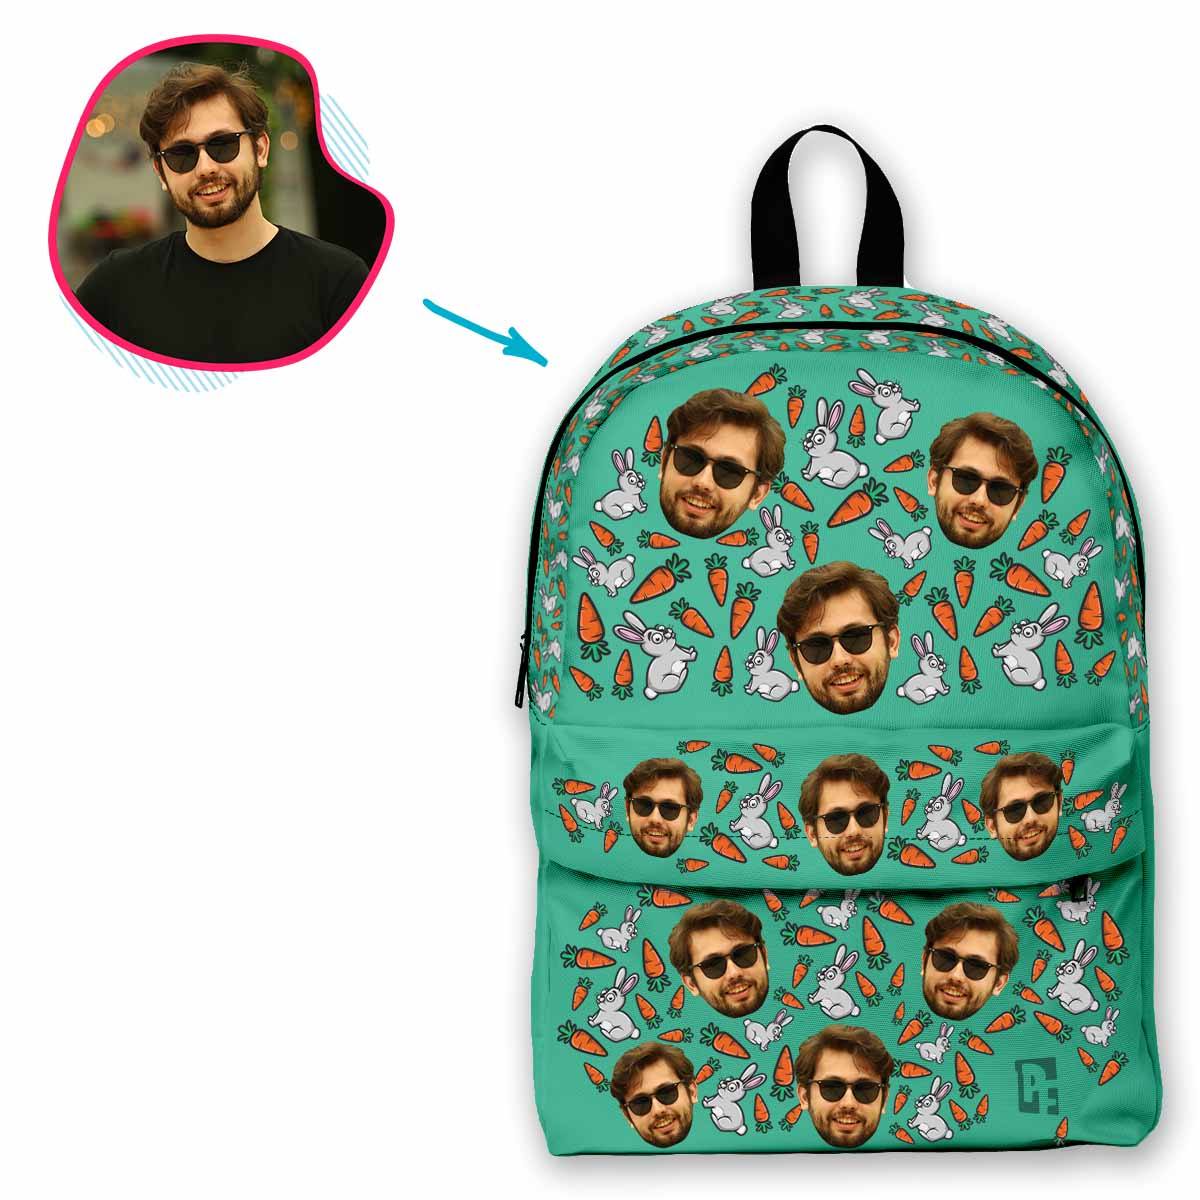 mint Bunny classic backpack personalized with photo of face printed on it